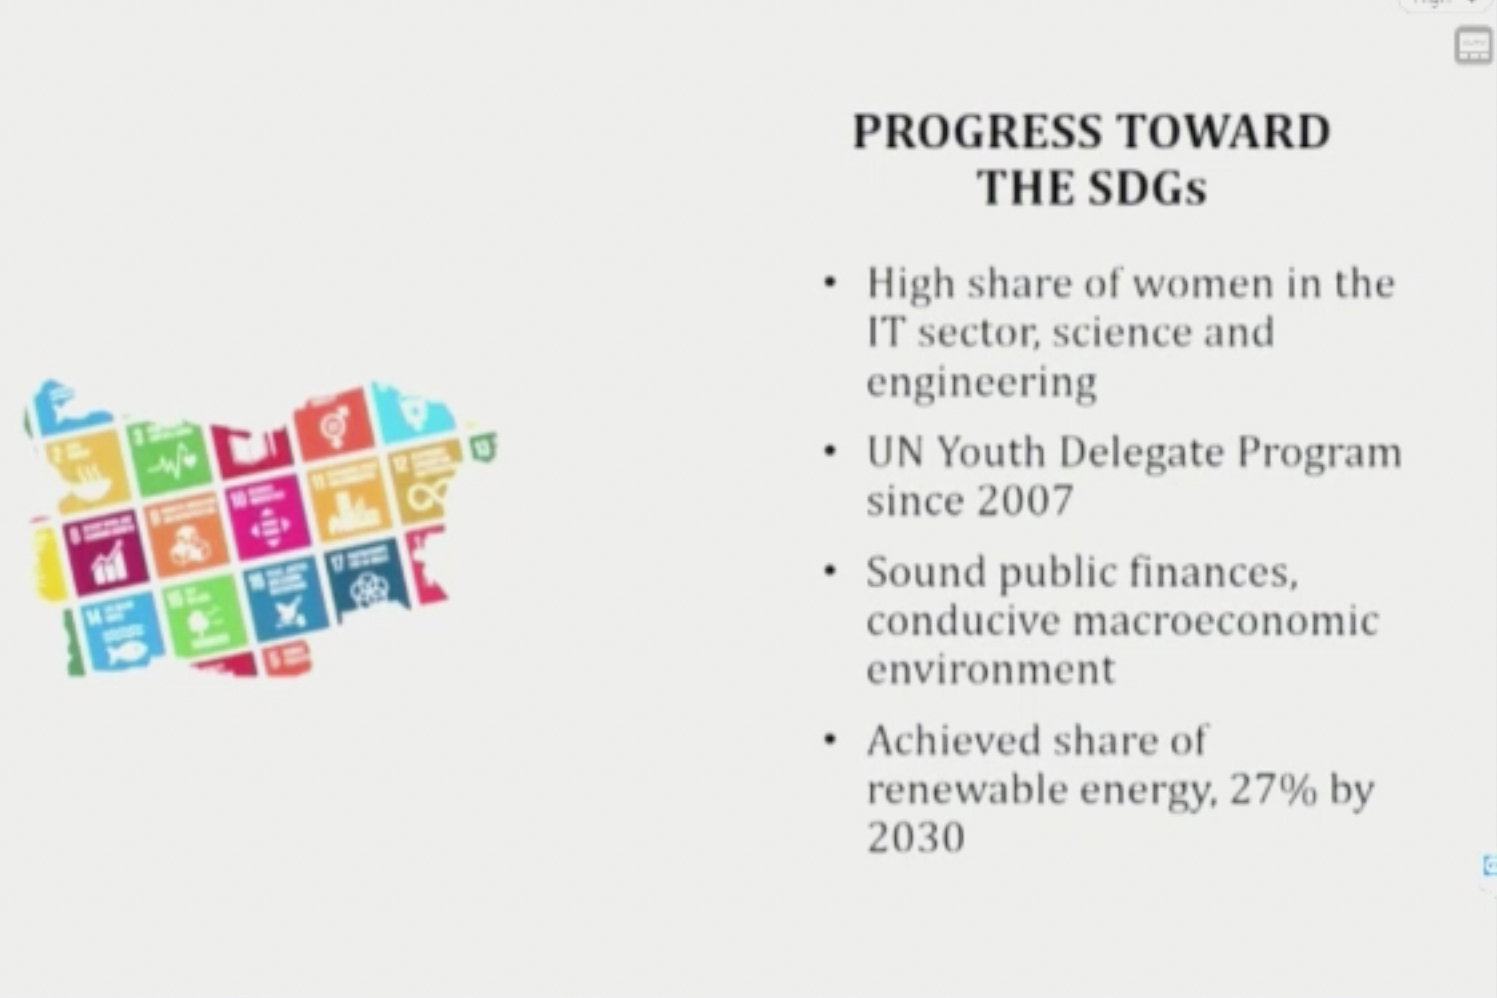 A slide from Bulgaria's VNR highlighted progress made toward achieving the SDGs.